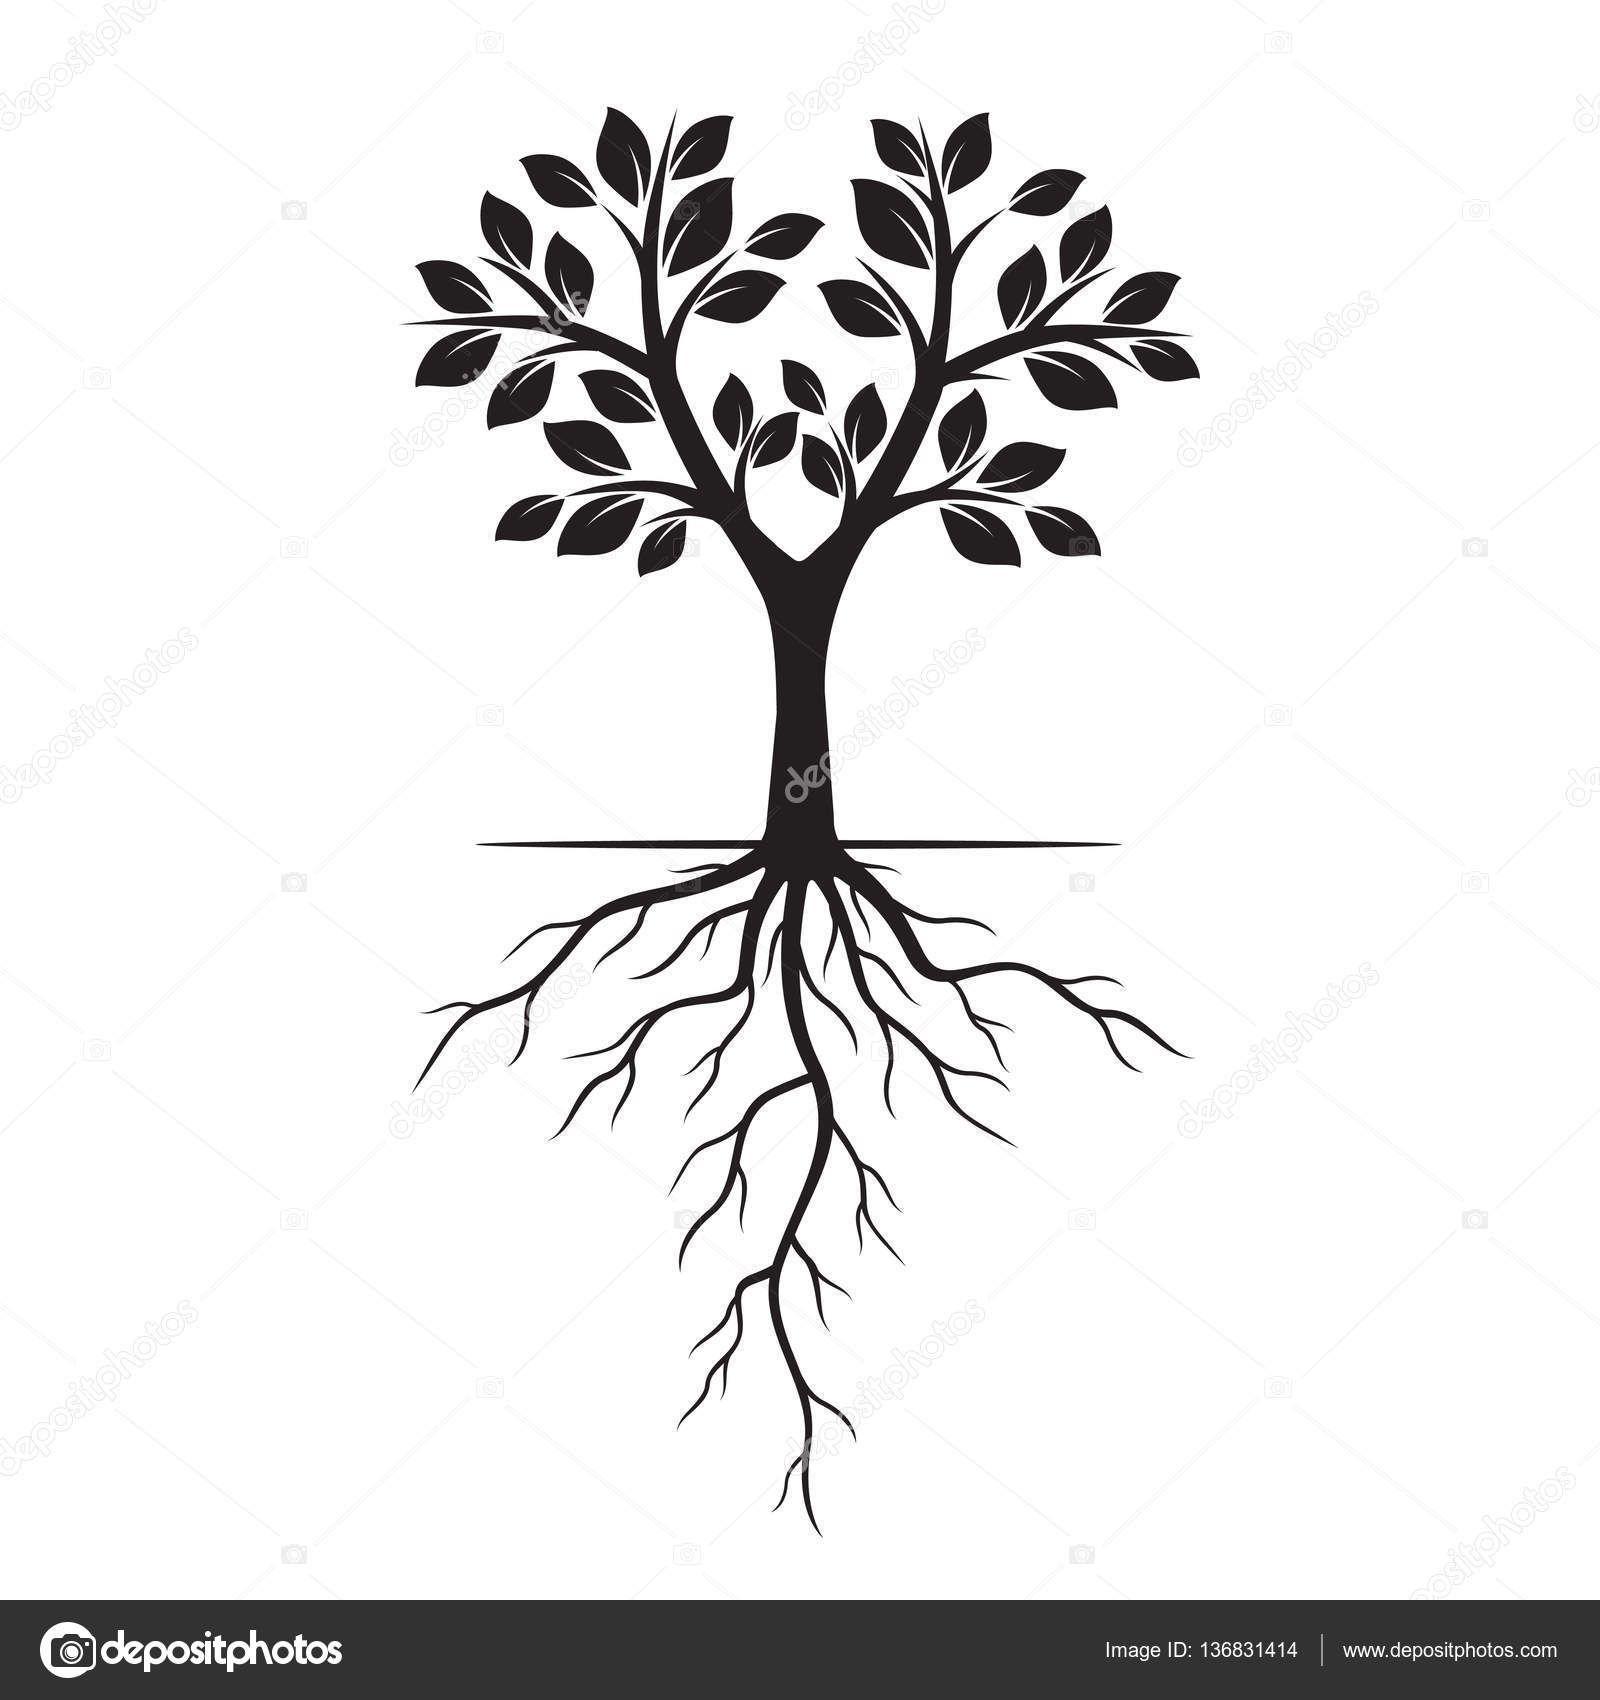 Black and White Tree with Roots Logo - Tree Roots Drawing at GetDrawings.com | Free for personal use Tree ...